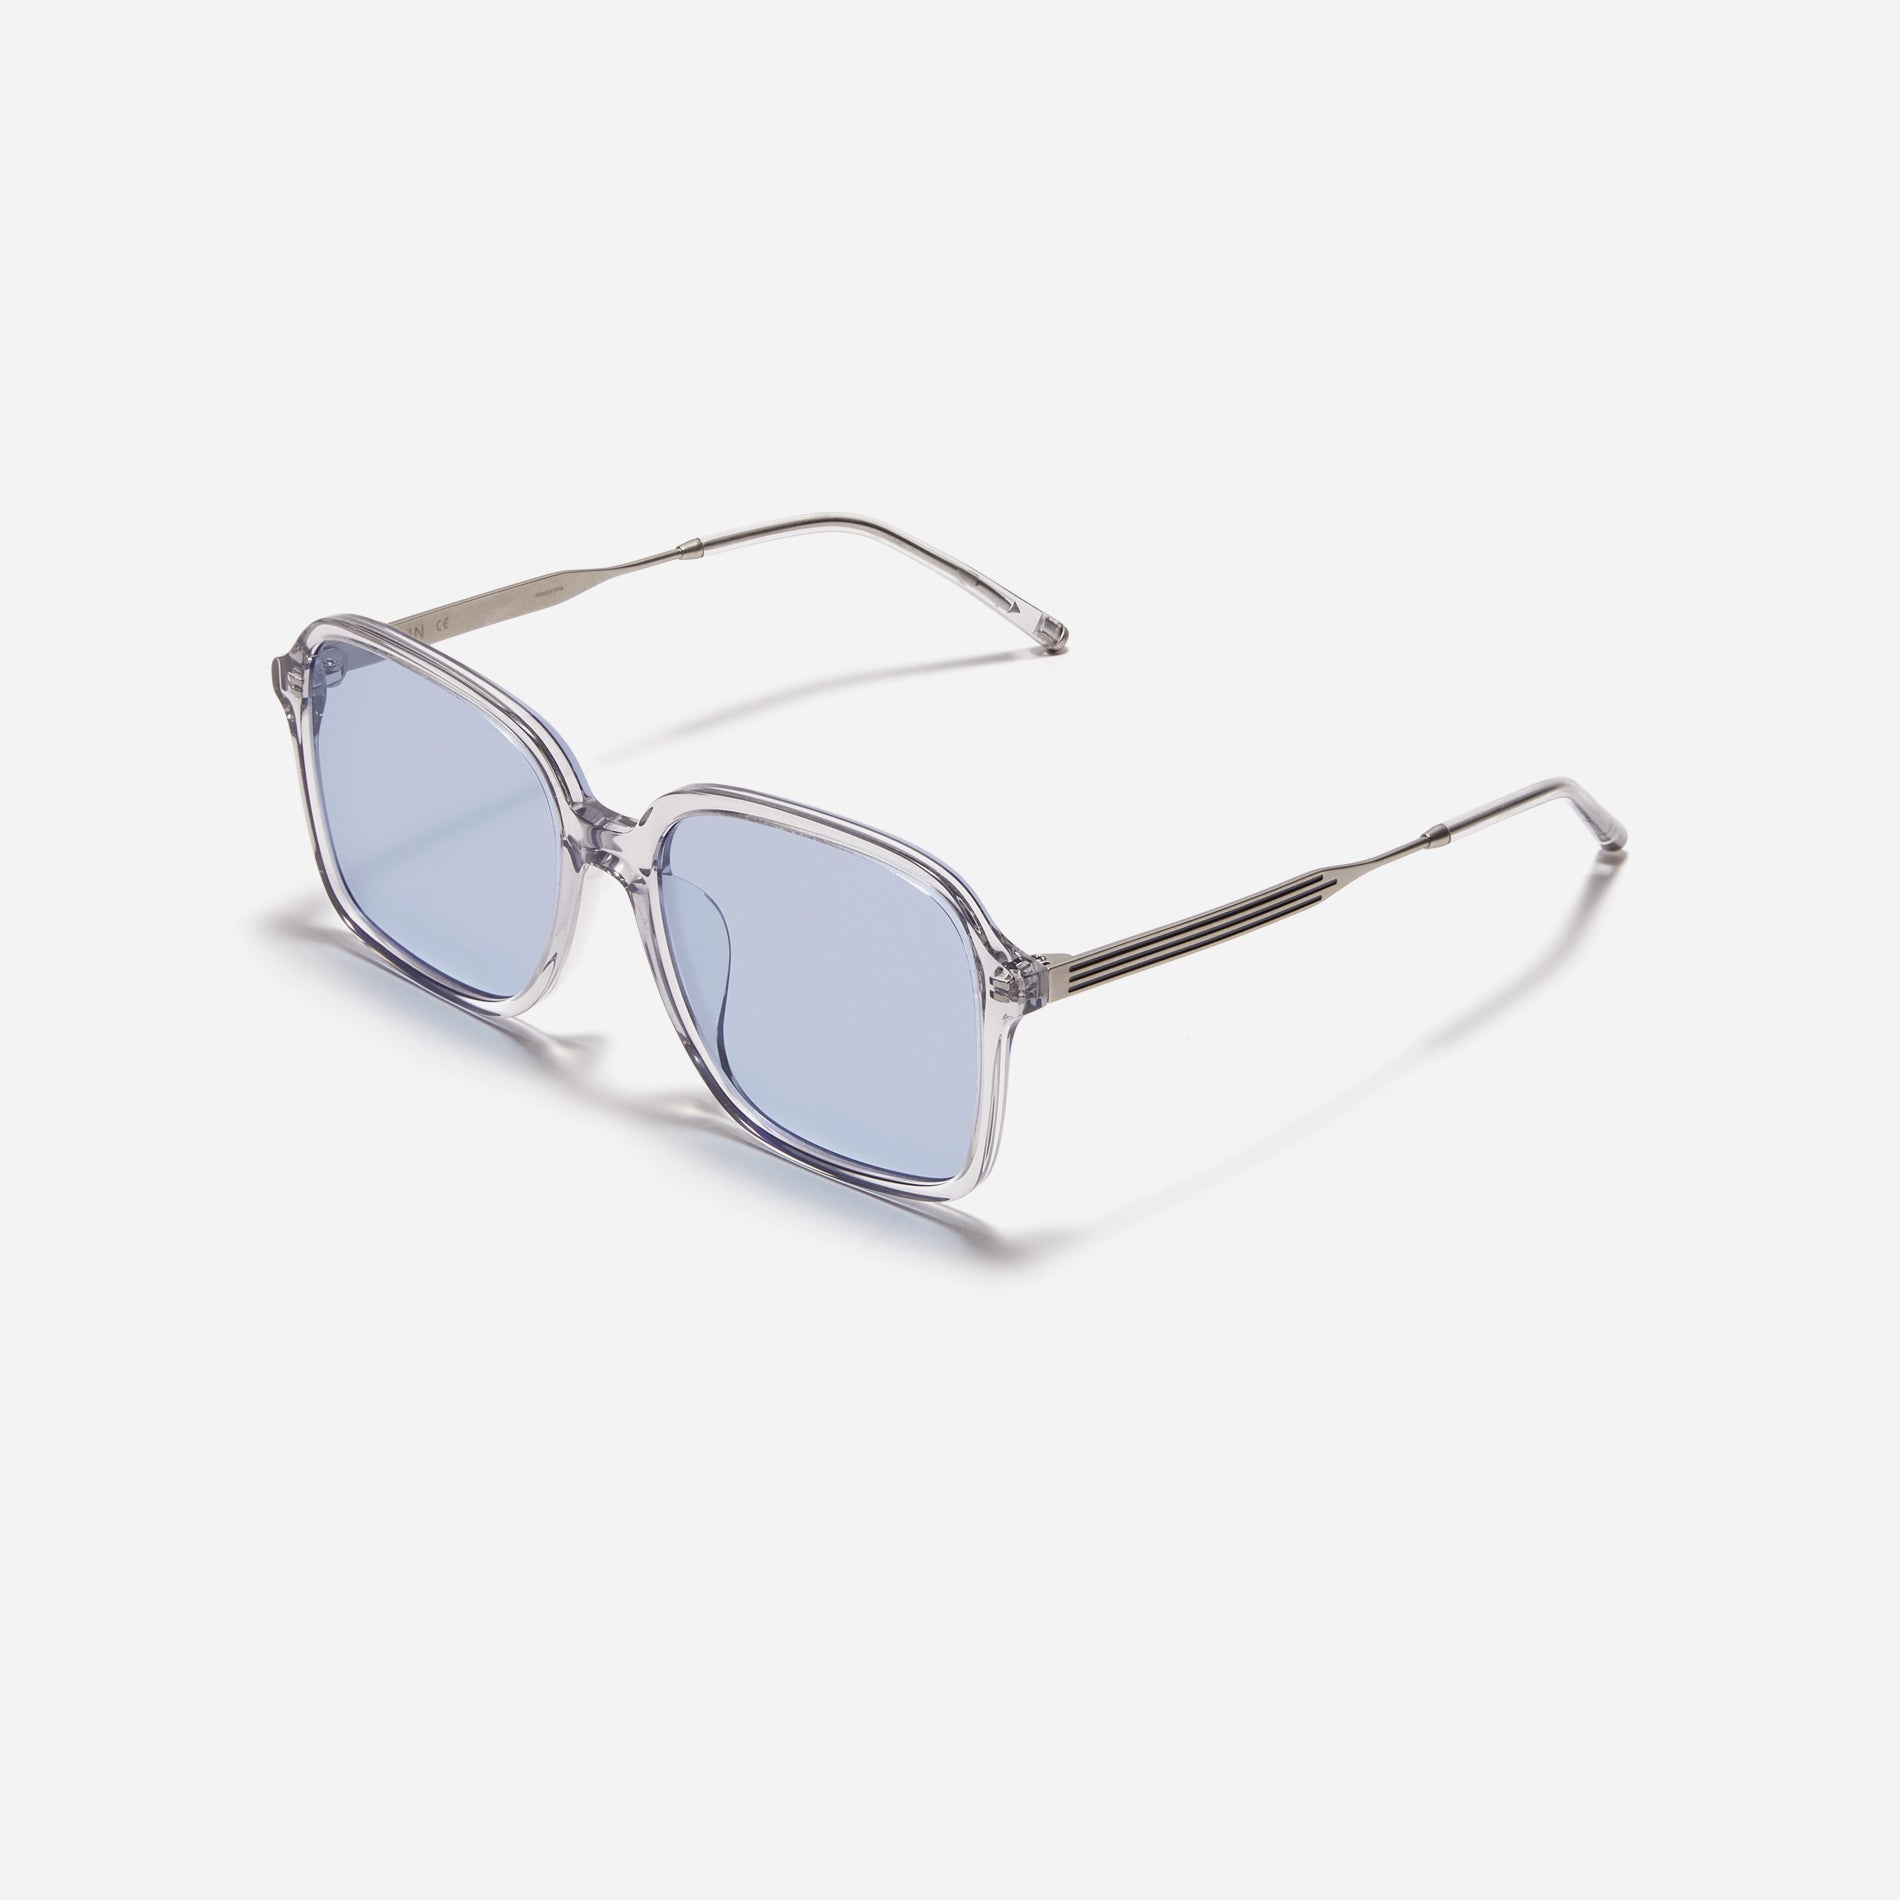 Square-shaped combination sunglasses  featuring an oversized retro frame and stylish color variaions